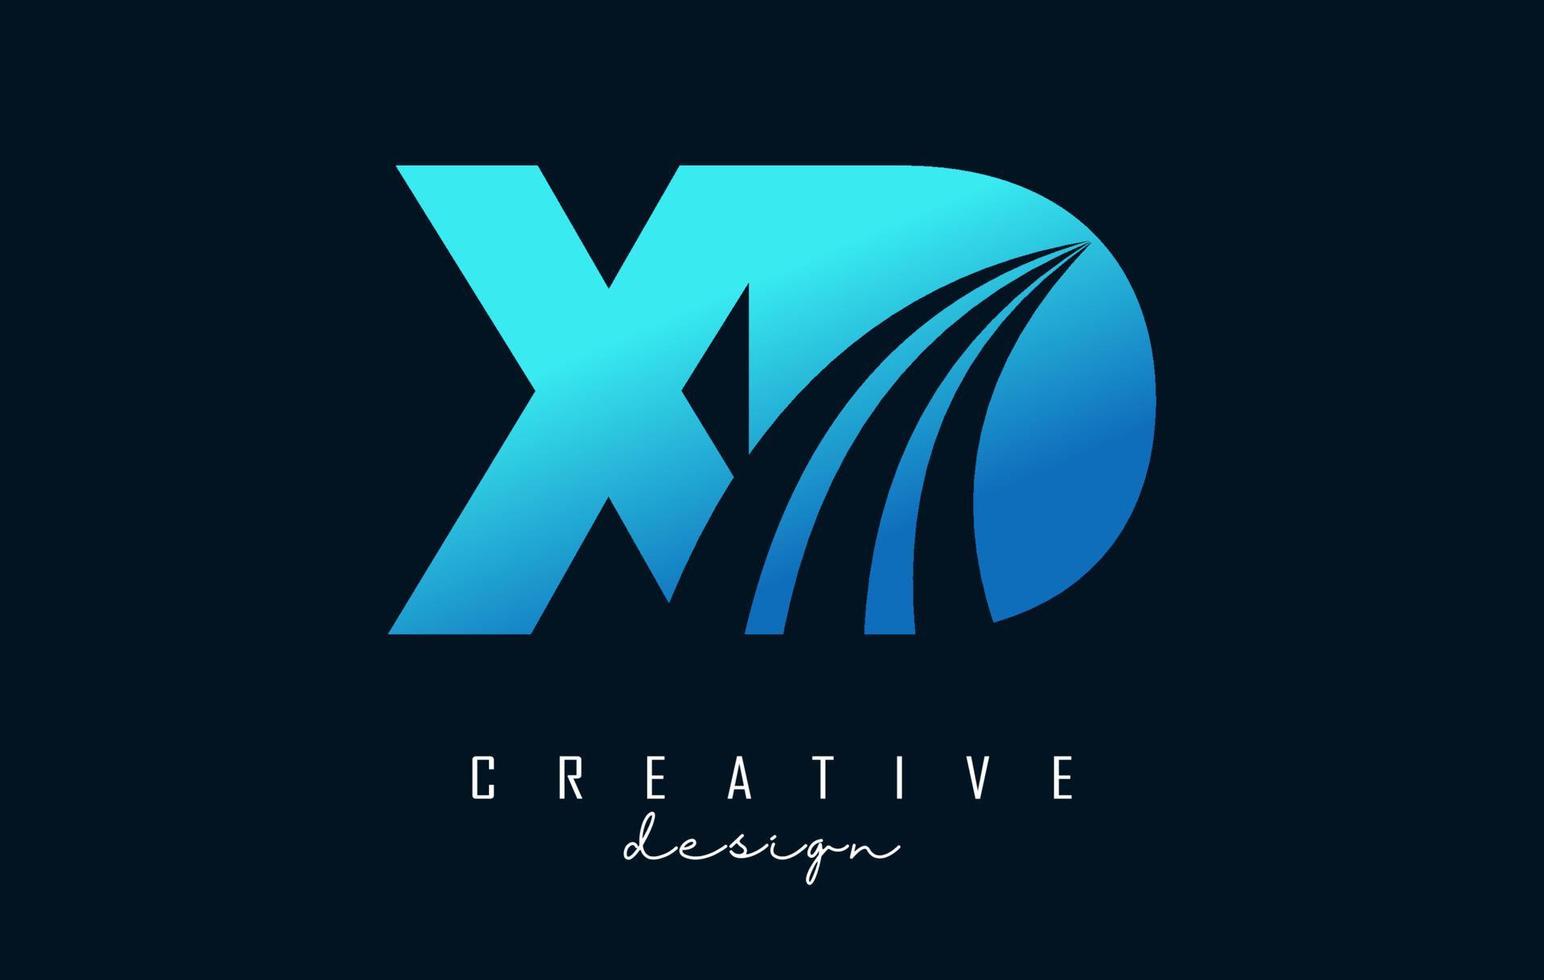 Creative blue letters XD x d logo with leading lines and road concept design. Letters with geometric design. vector